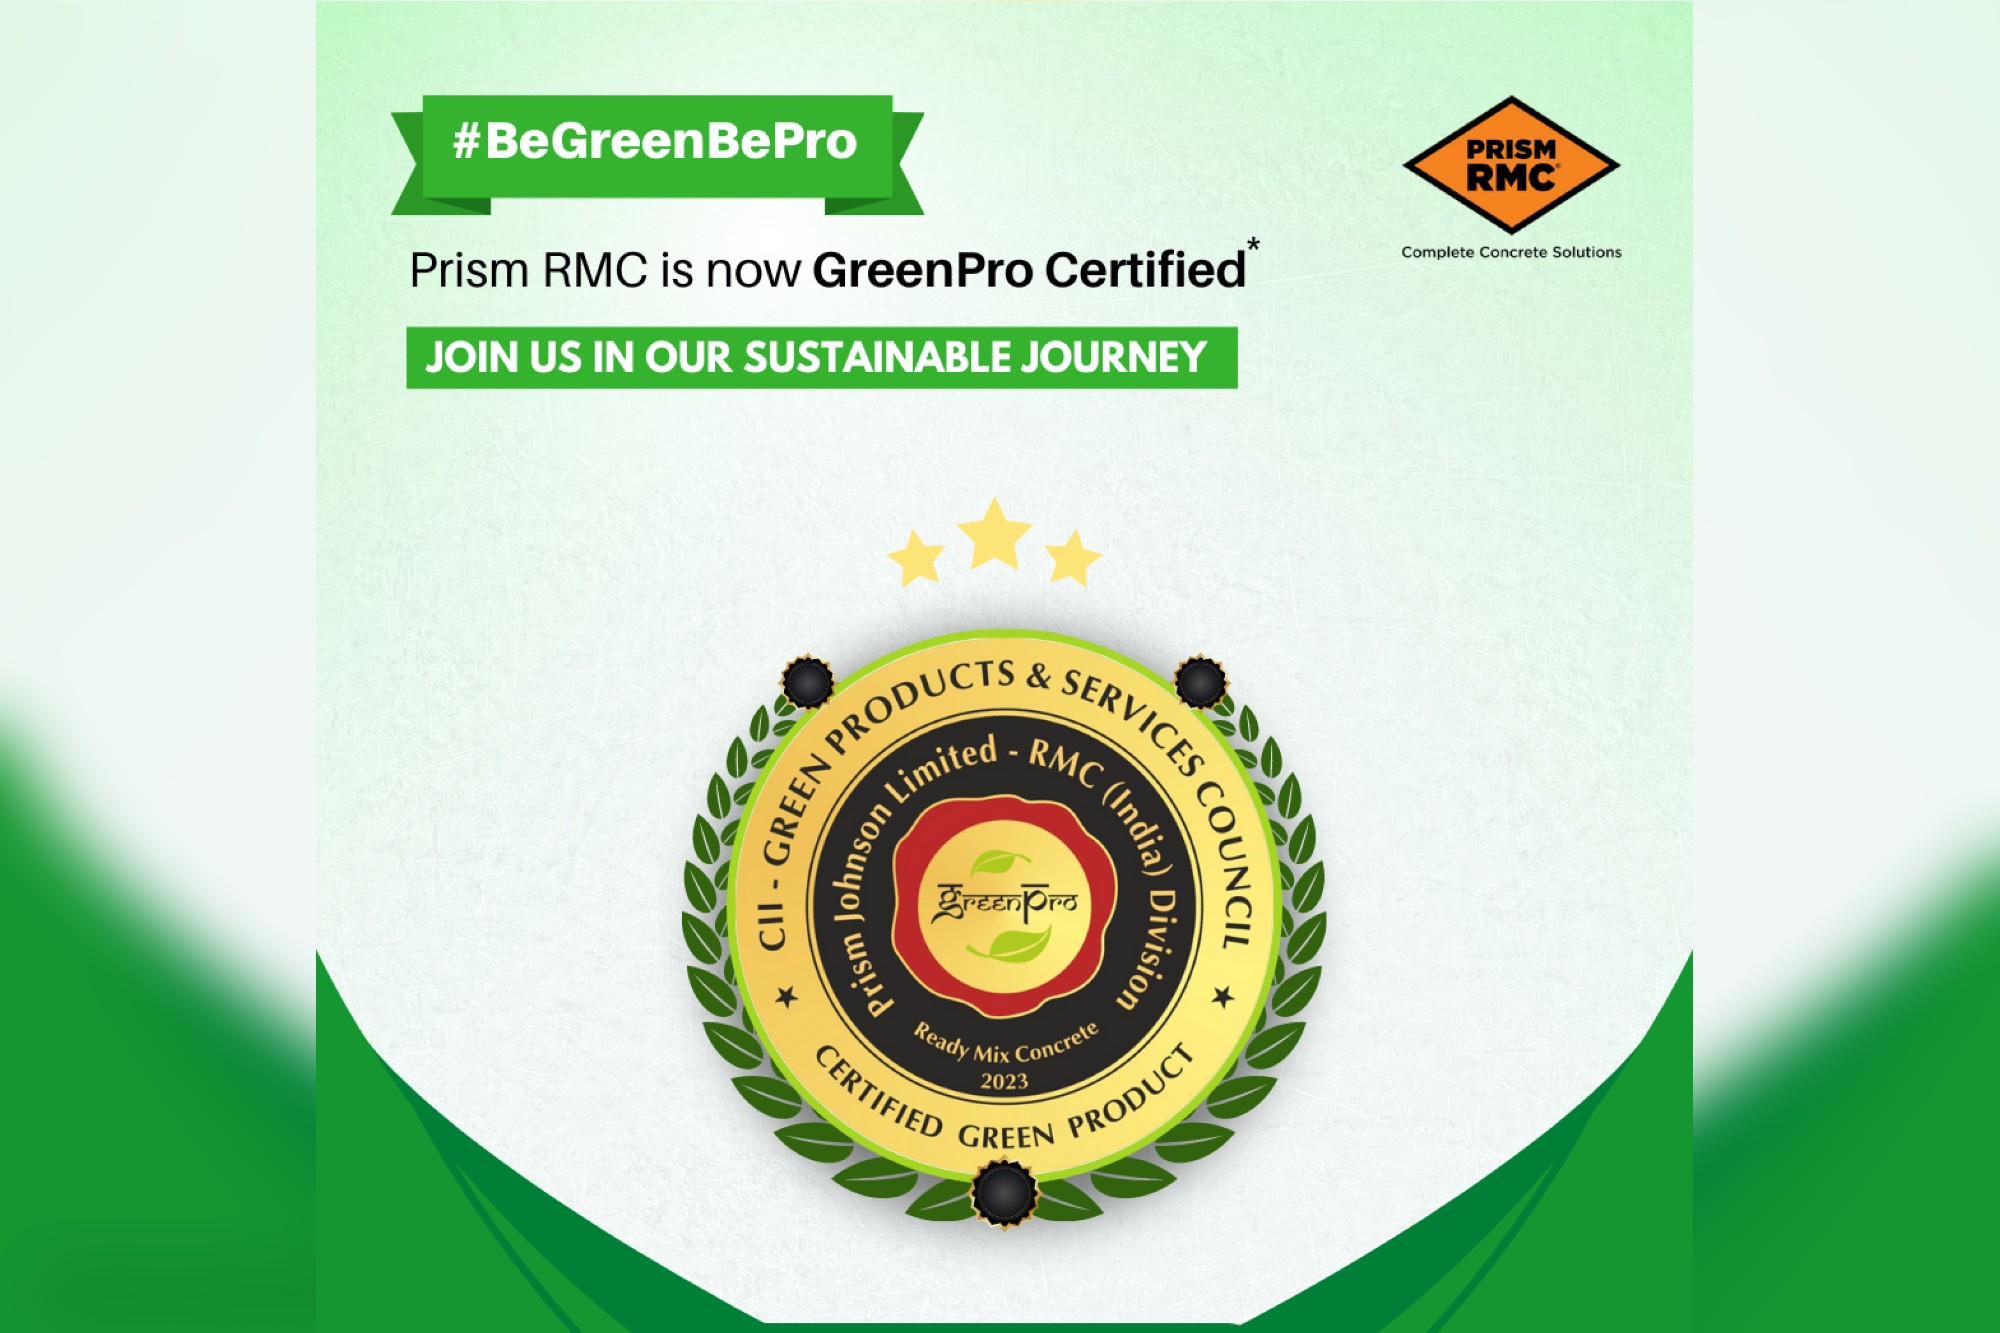 Prism RMC is building a sustainable future